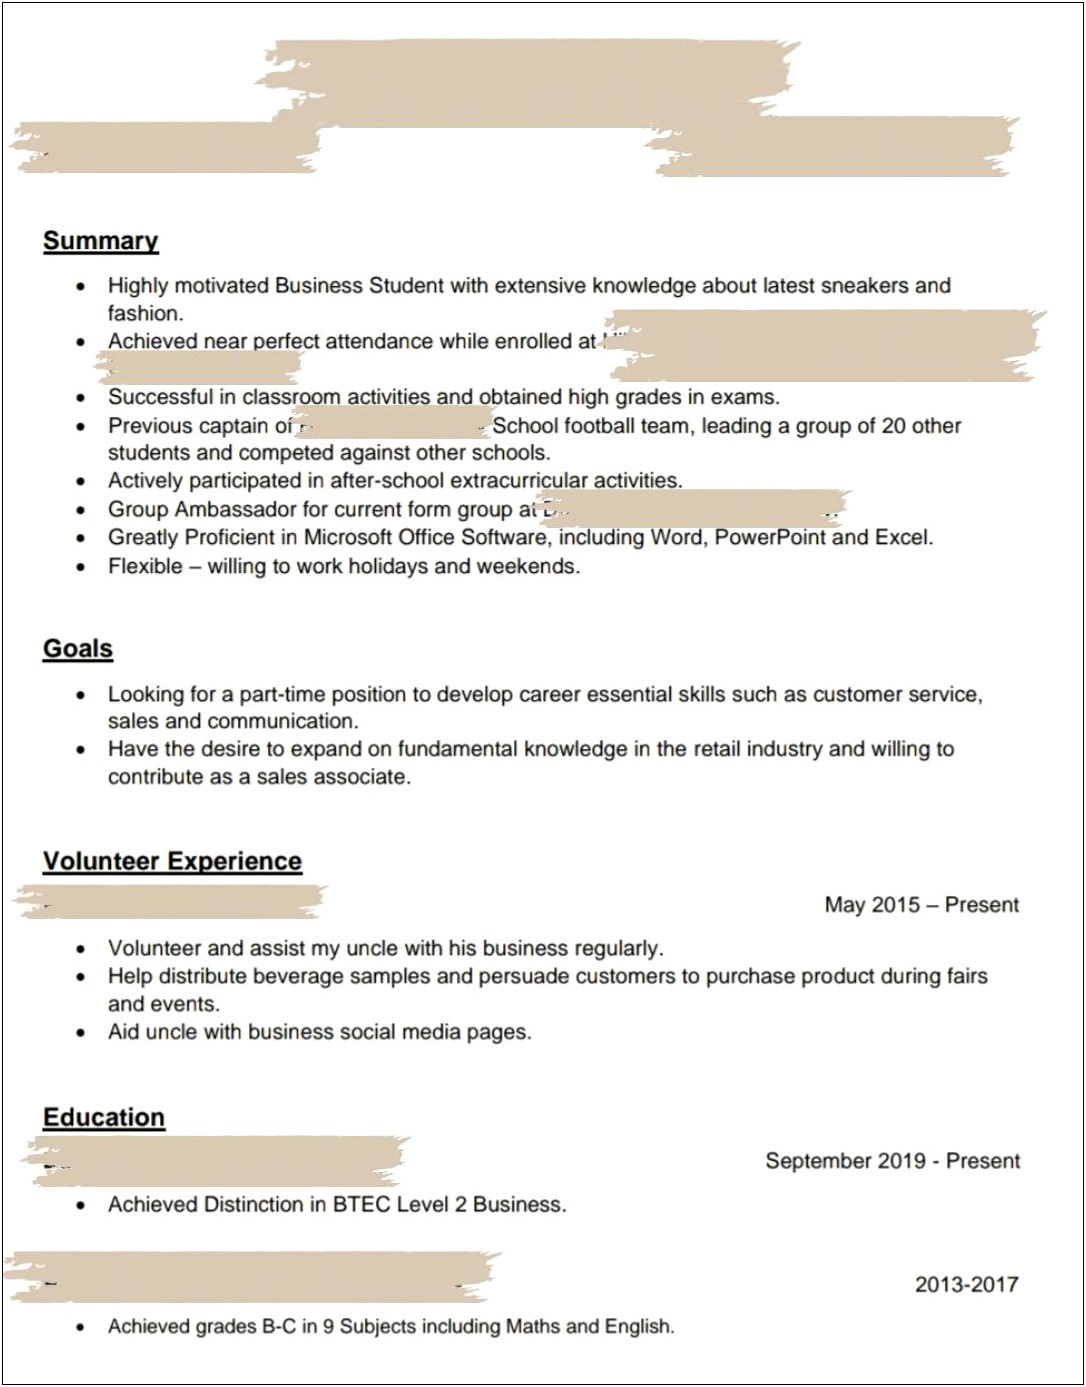 Resume With No Experience Applying To A Retail